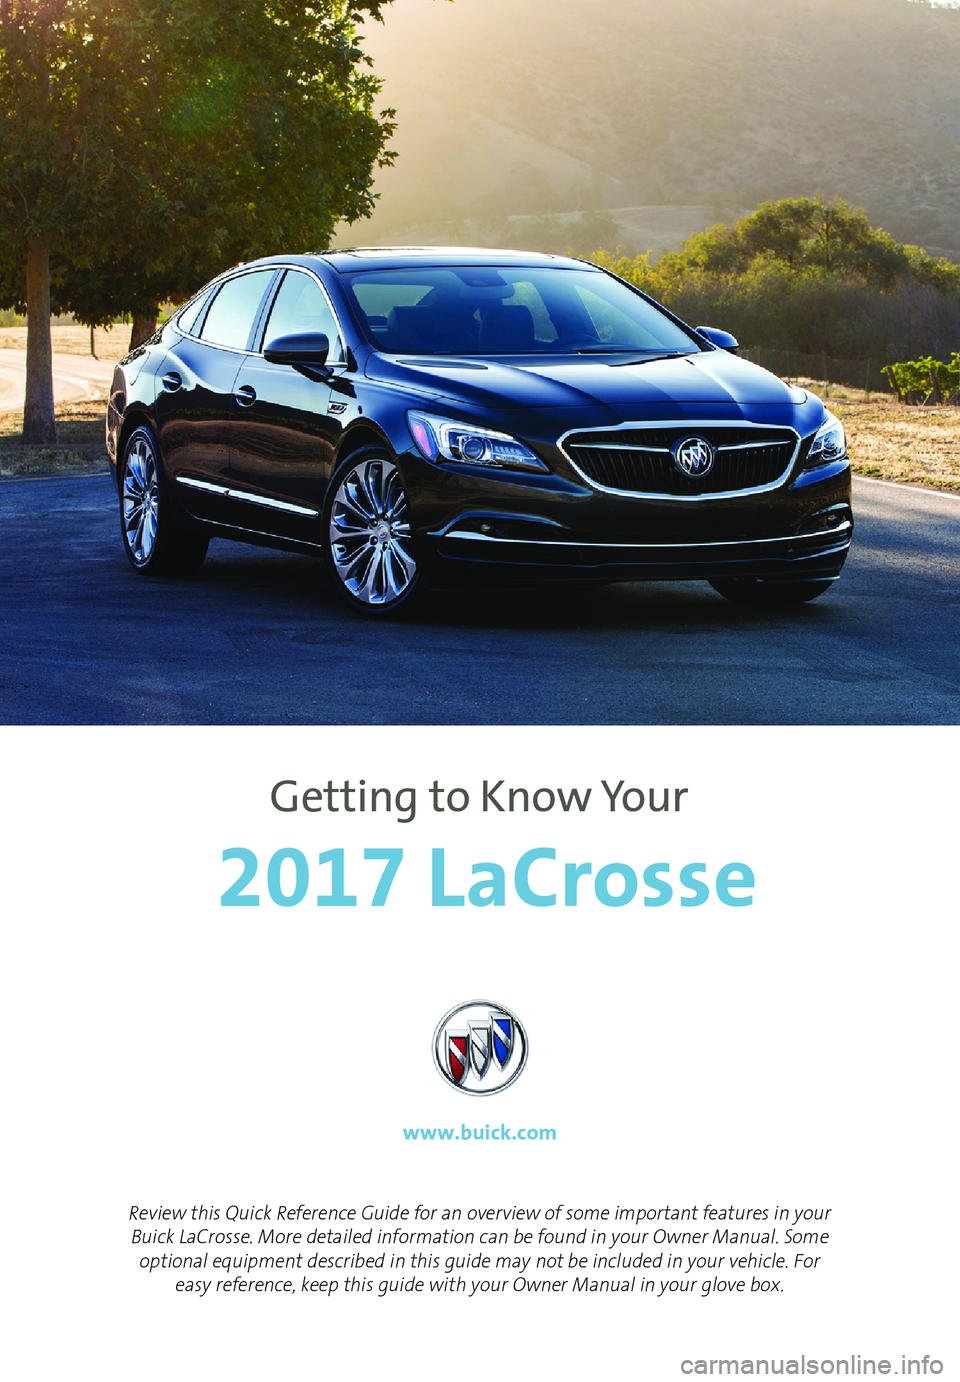 BUICK LACROSSE 2017  Get To Know Guide 1
Review this Quick Reference Guide for an overview of some important features in your Buick LaCrosse. More detailed information can be found in your Owner Manual. Some  optional equipment
 described 